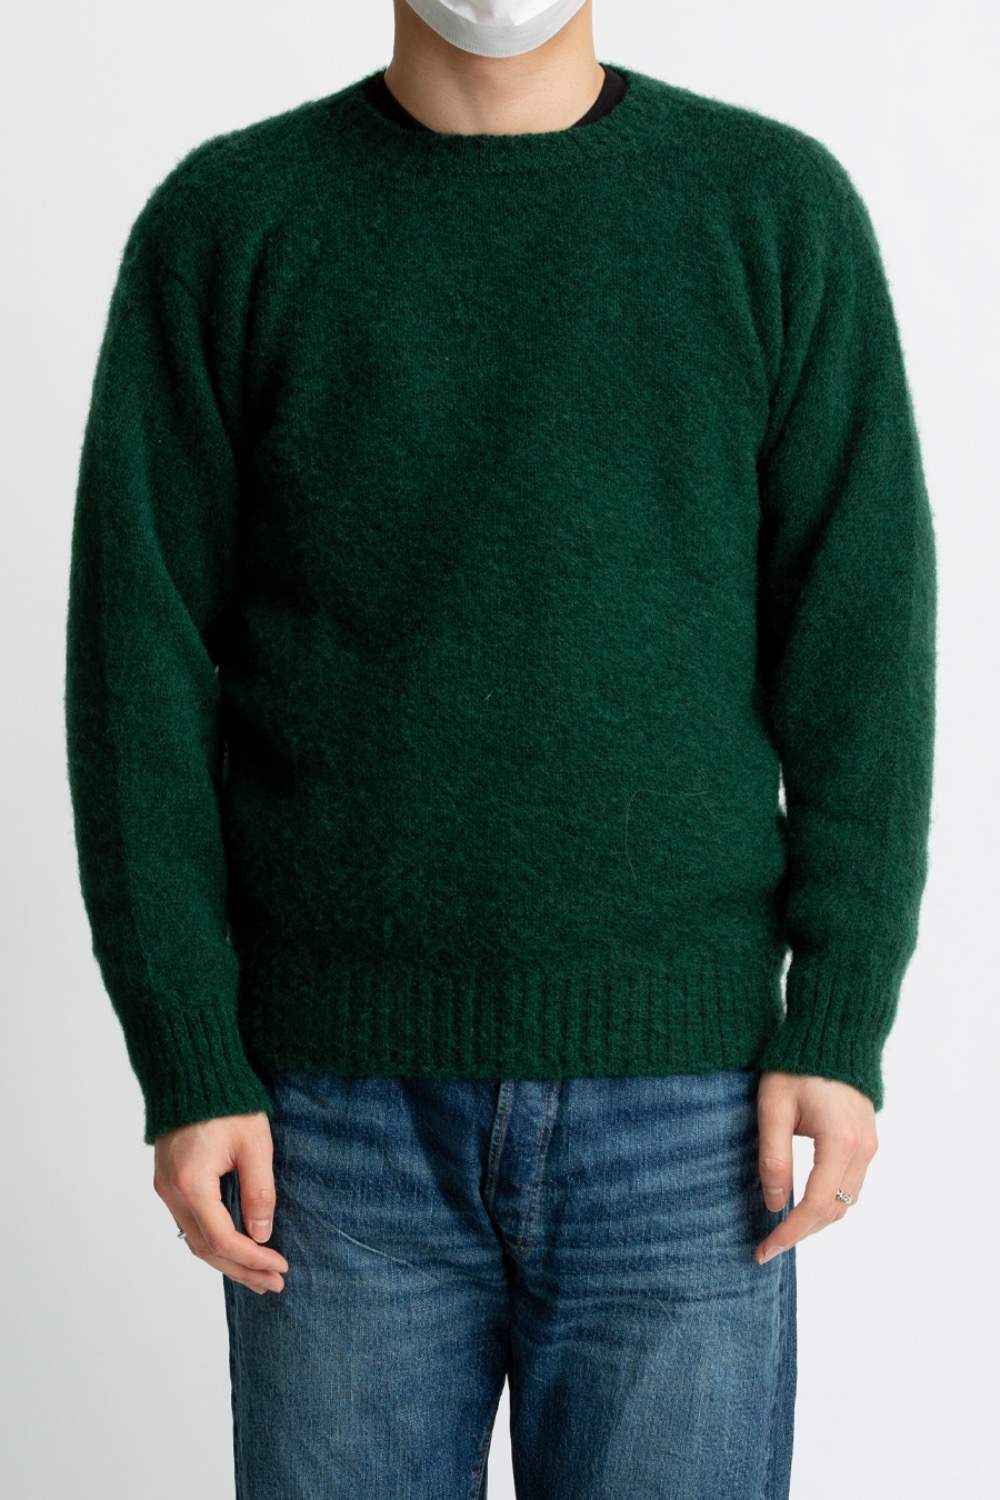 SHAGGY DOG CREW NECK SWEATER 51116, FOREST